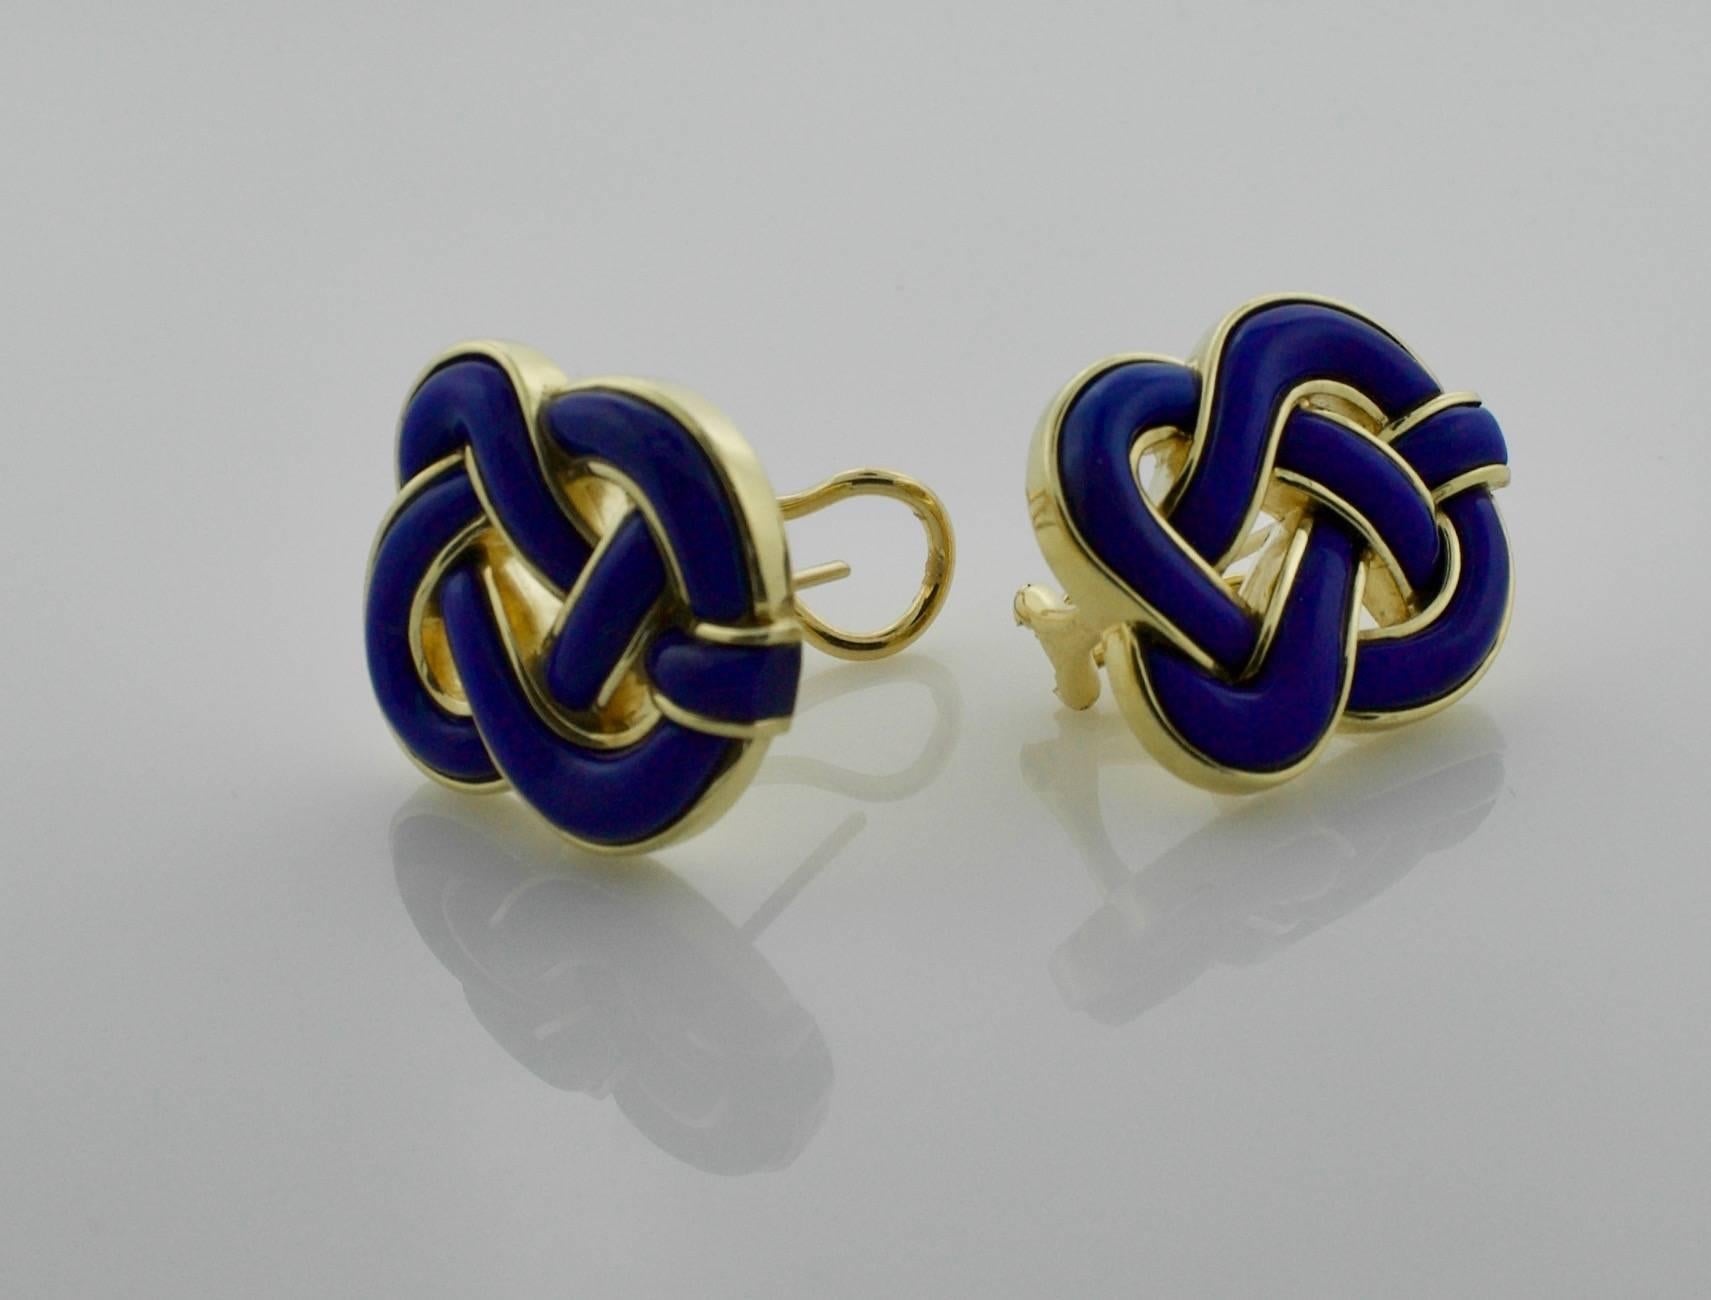 Tiffany and Co. Lapis and 18k Yellow Gold Earrings circa 1970's

